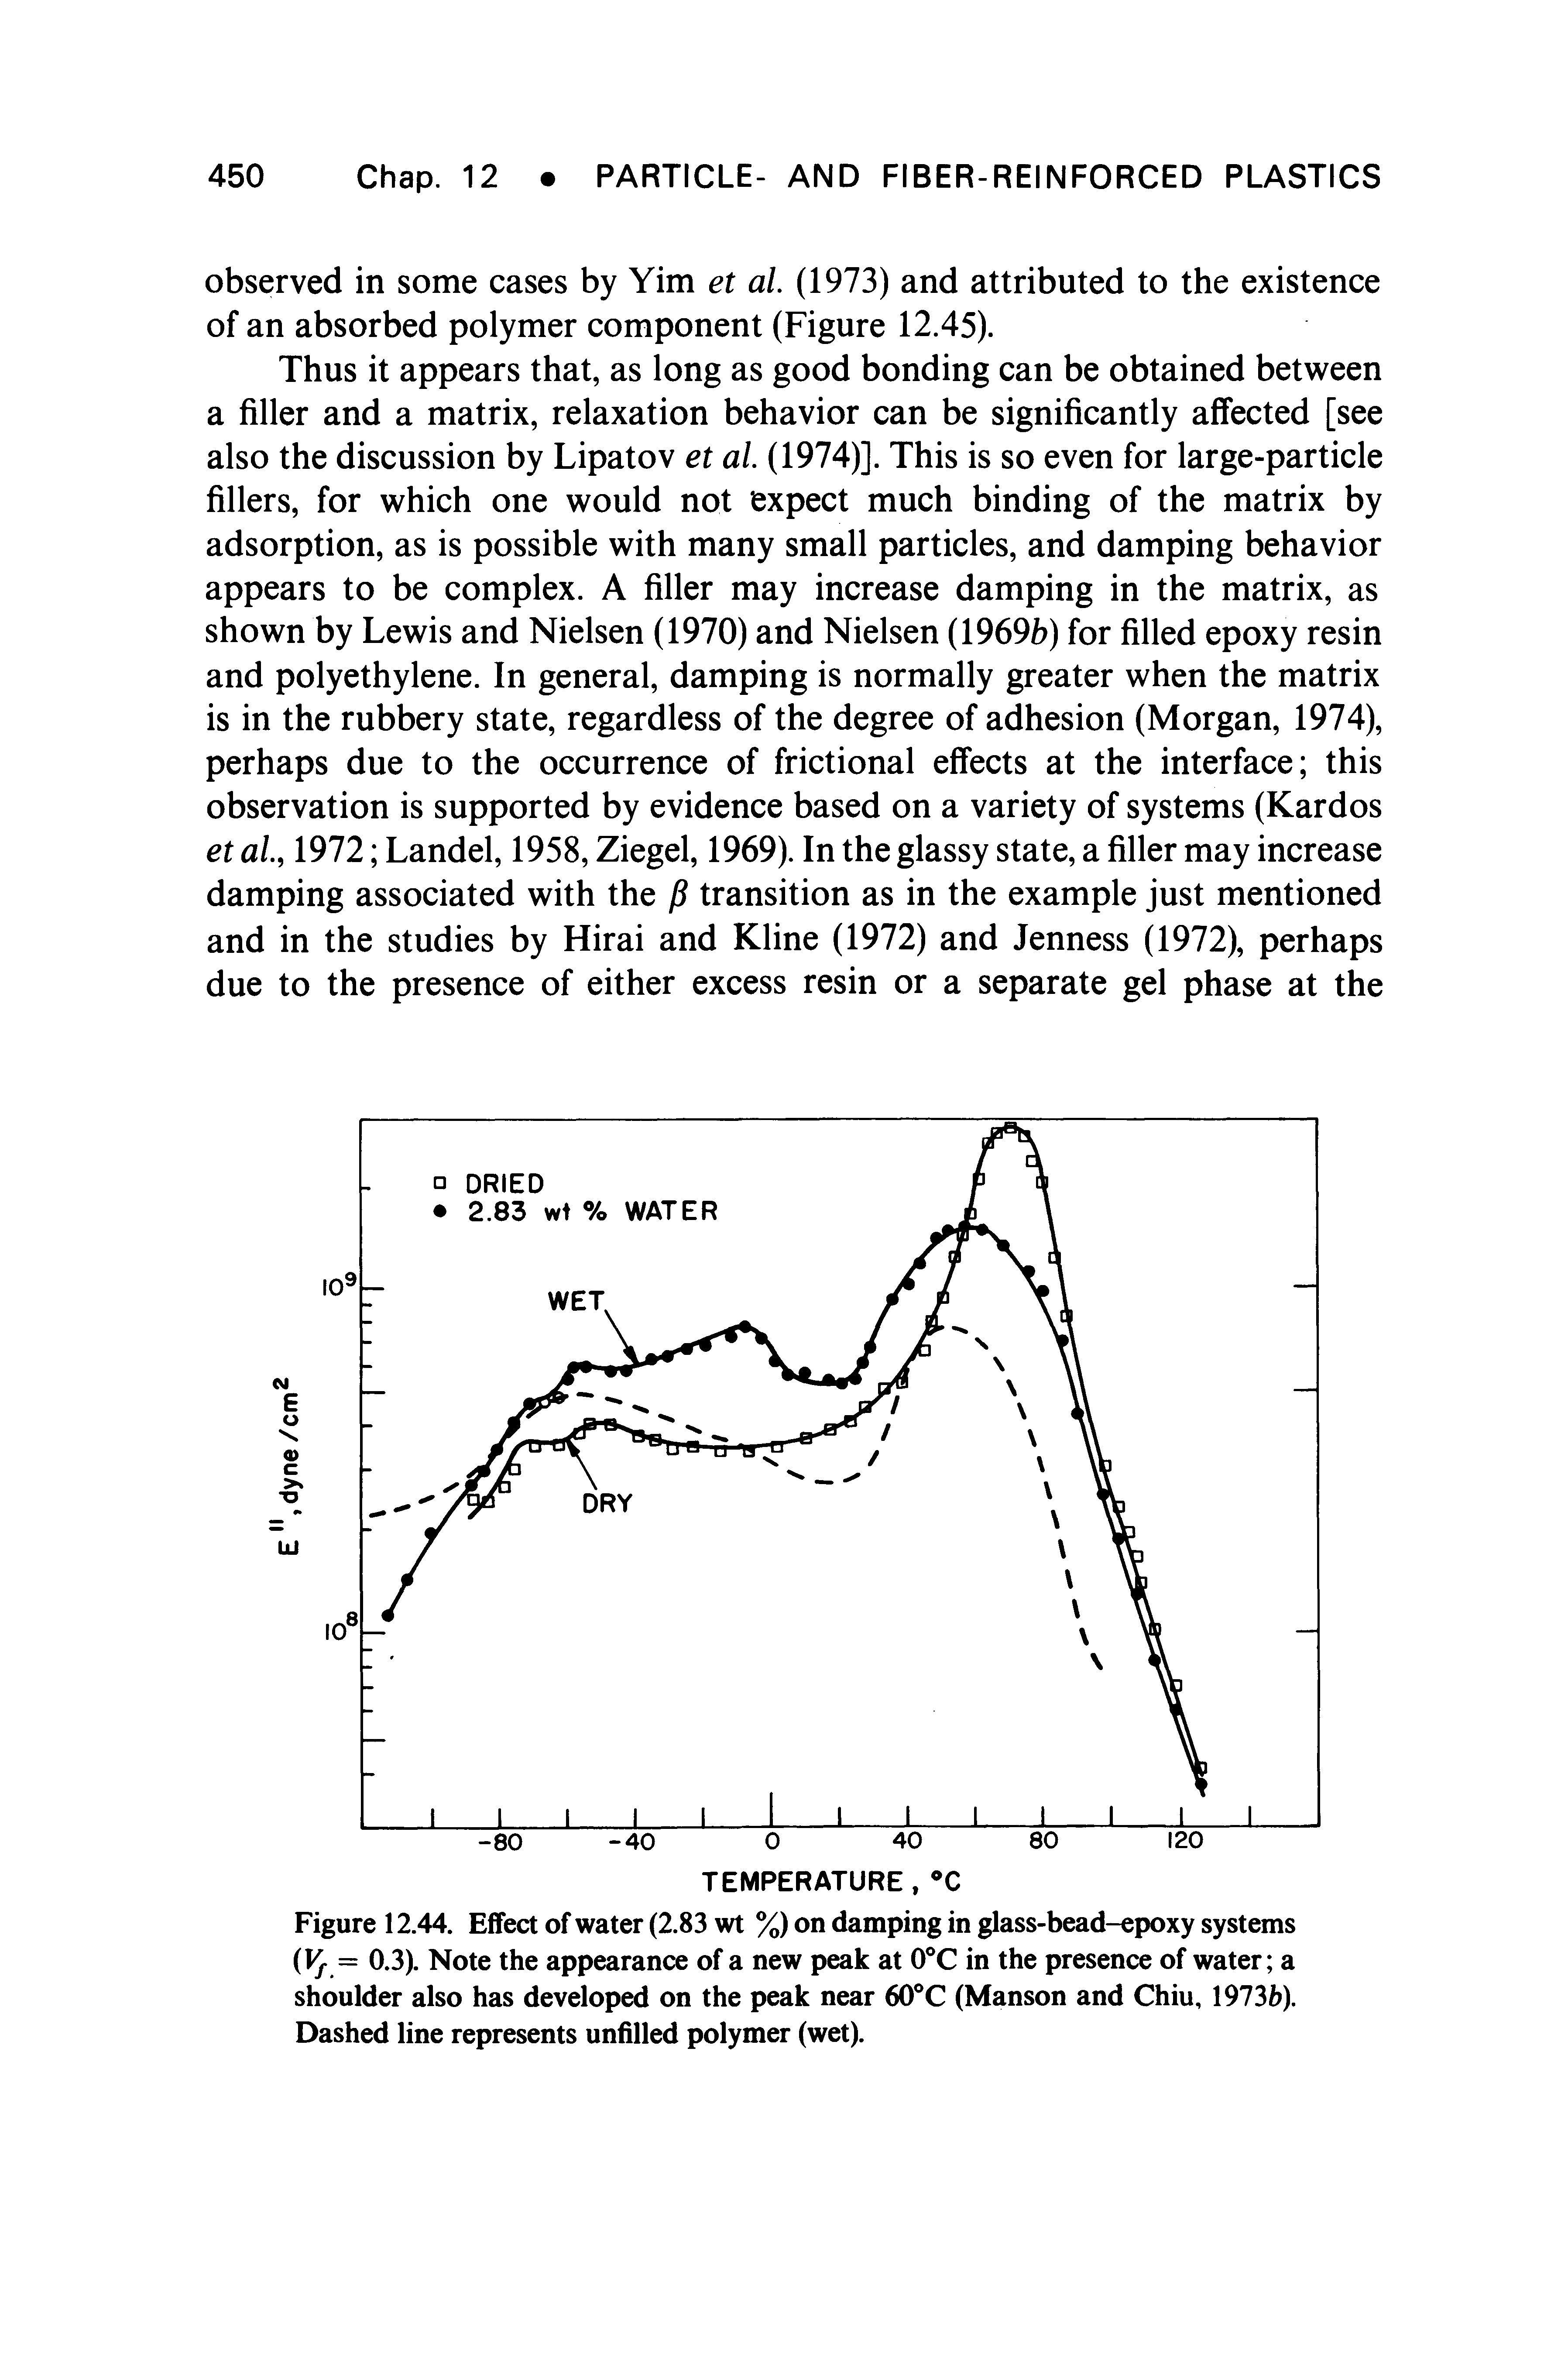 Figure 12.44. Effect of water (2.83 wt %) on damping in glass-bead-epoxy systems Vj- = 0.3). Note the appearance of a new peak at 0 C in the presence of water a shoulder also has developed on the peak near 60 C (Manson and Chiu, 1973h). Dashed line represents unfilled polymer (wet).